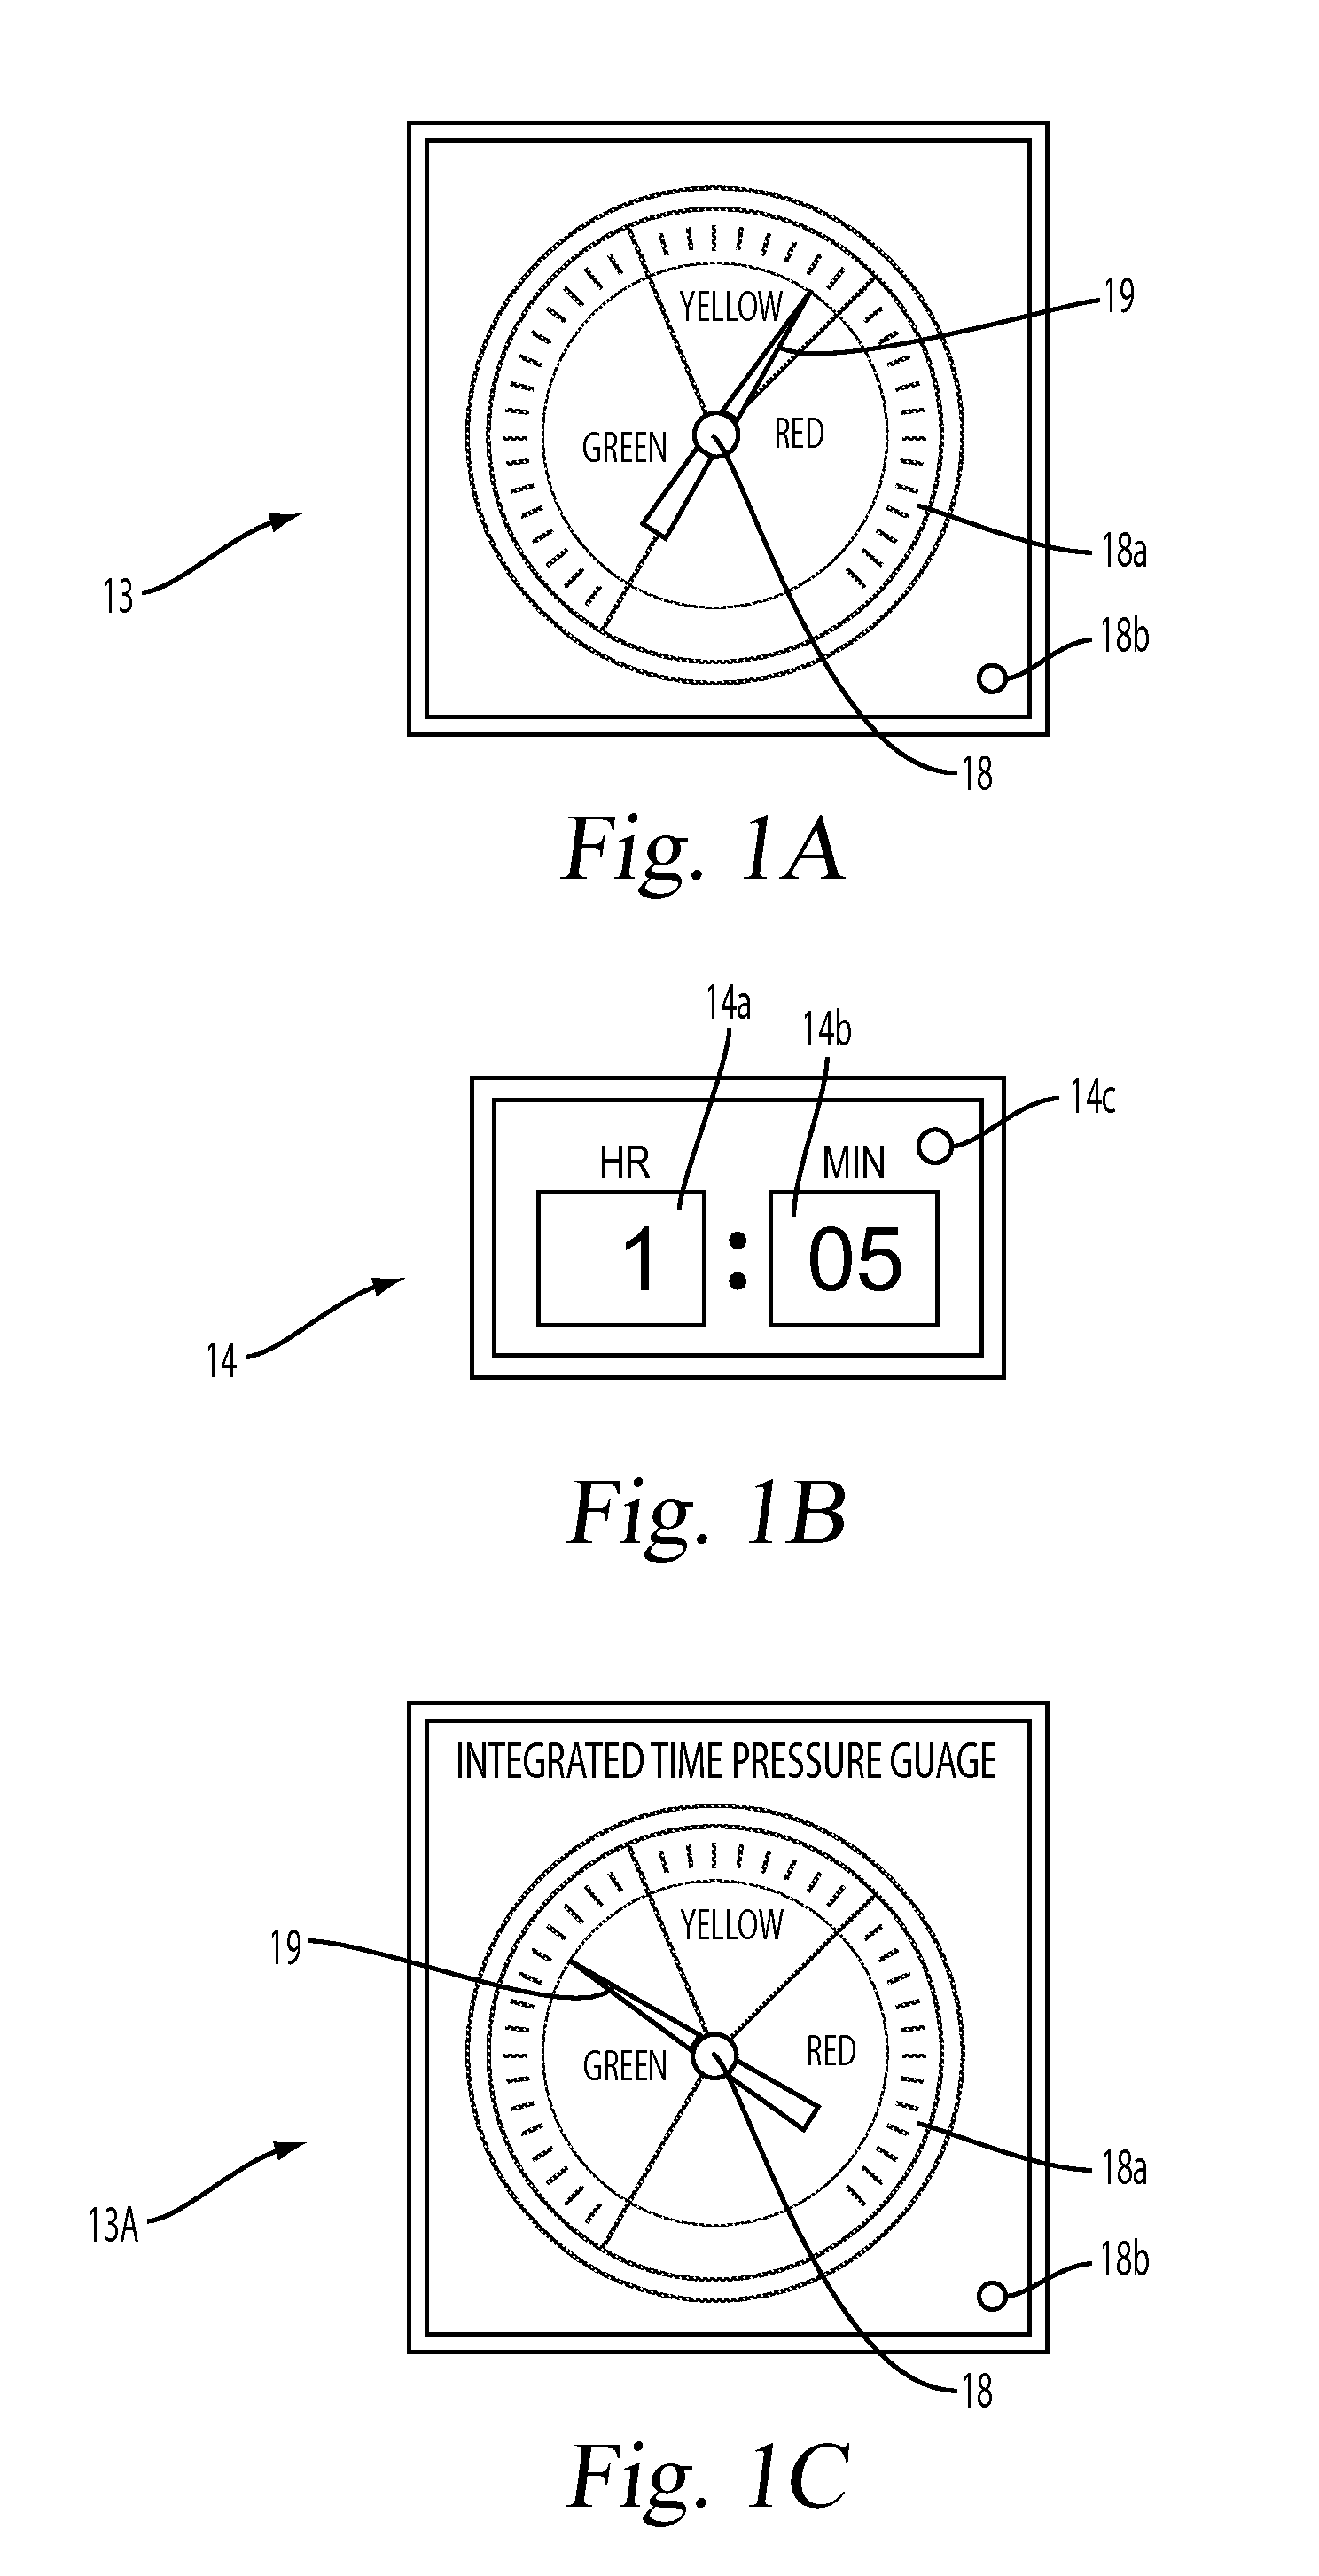 Surgical retractor instrument systems and methods of using the same